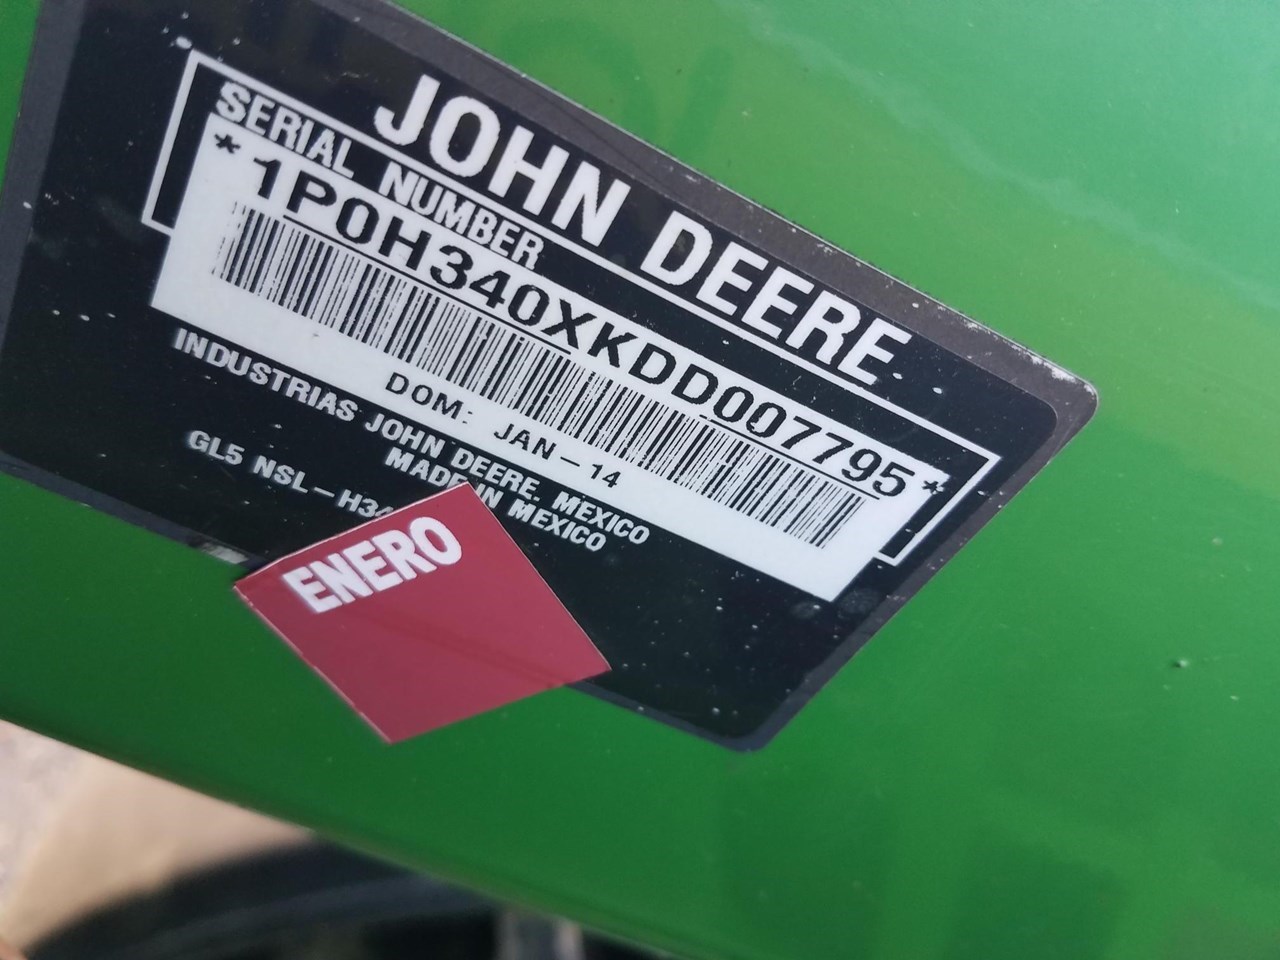 2015 John Deere 6125R Tractor - Utility For Sale